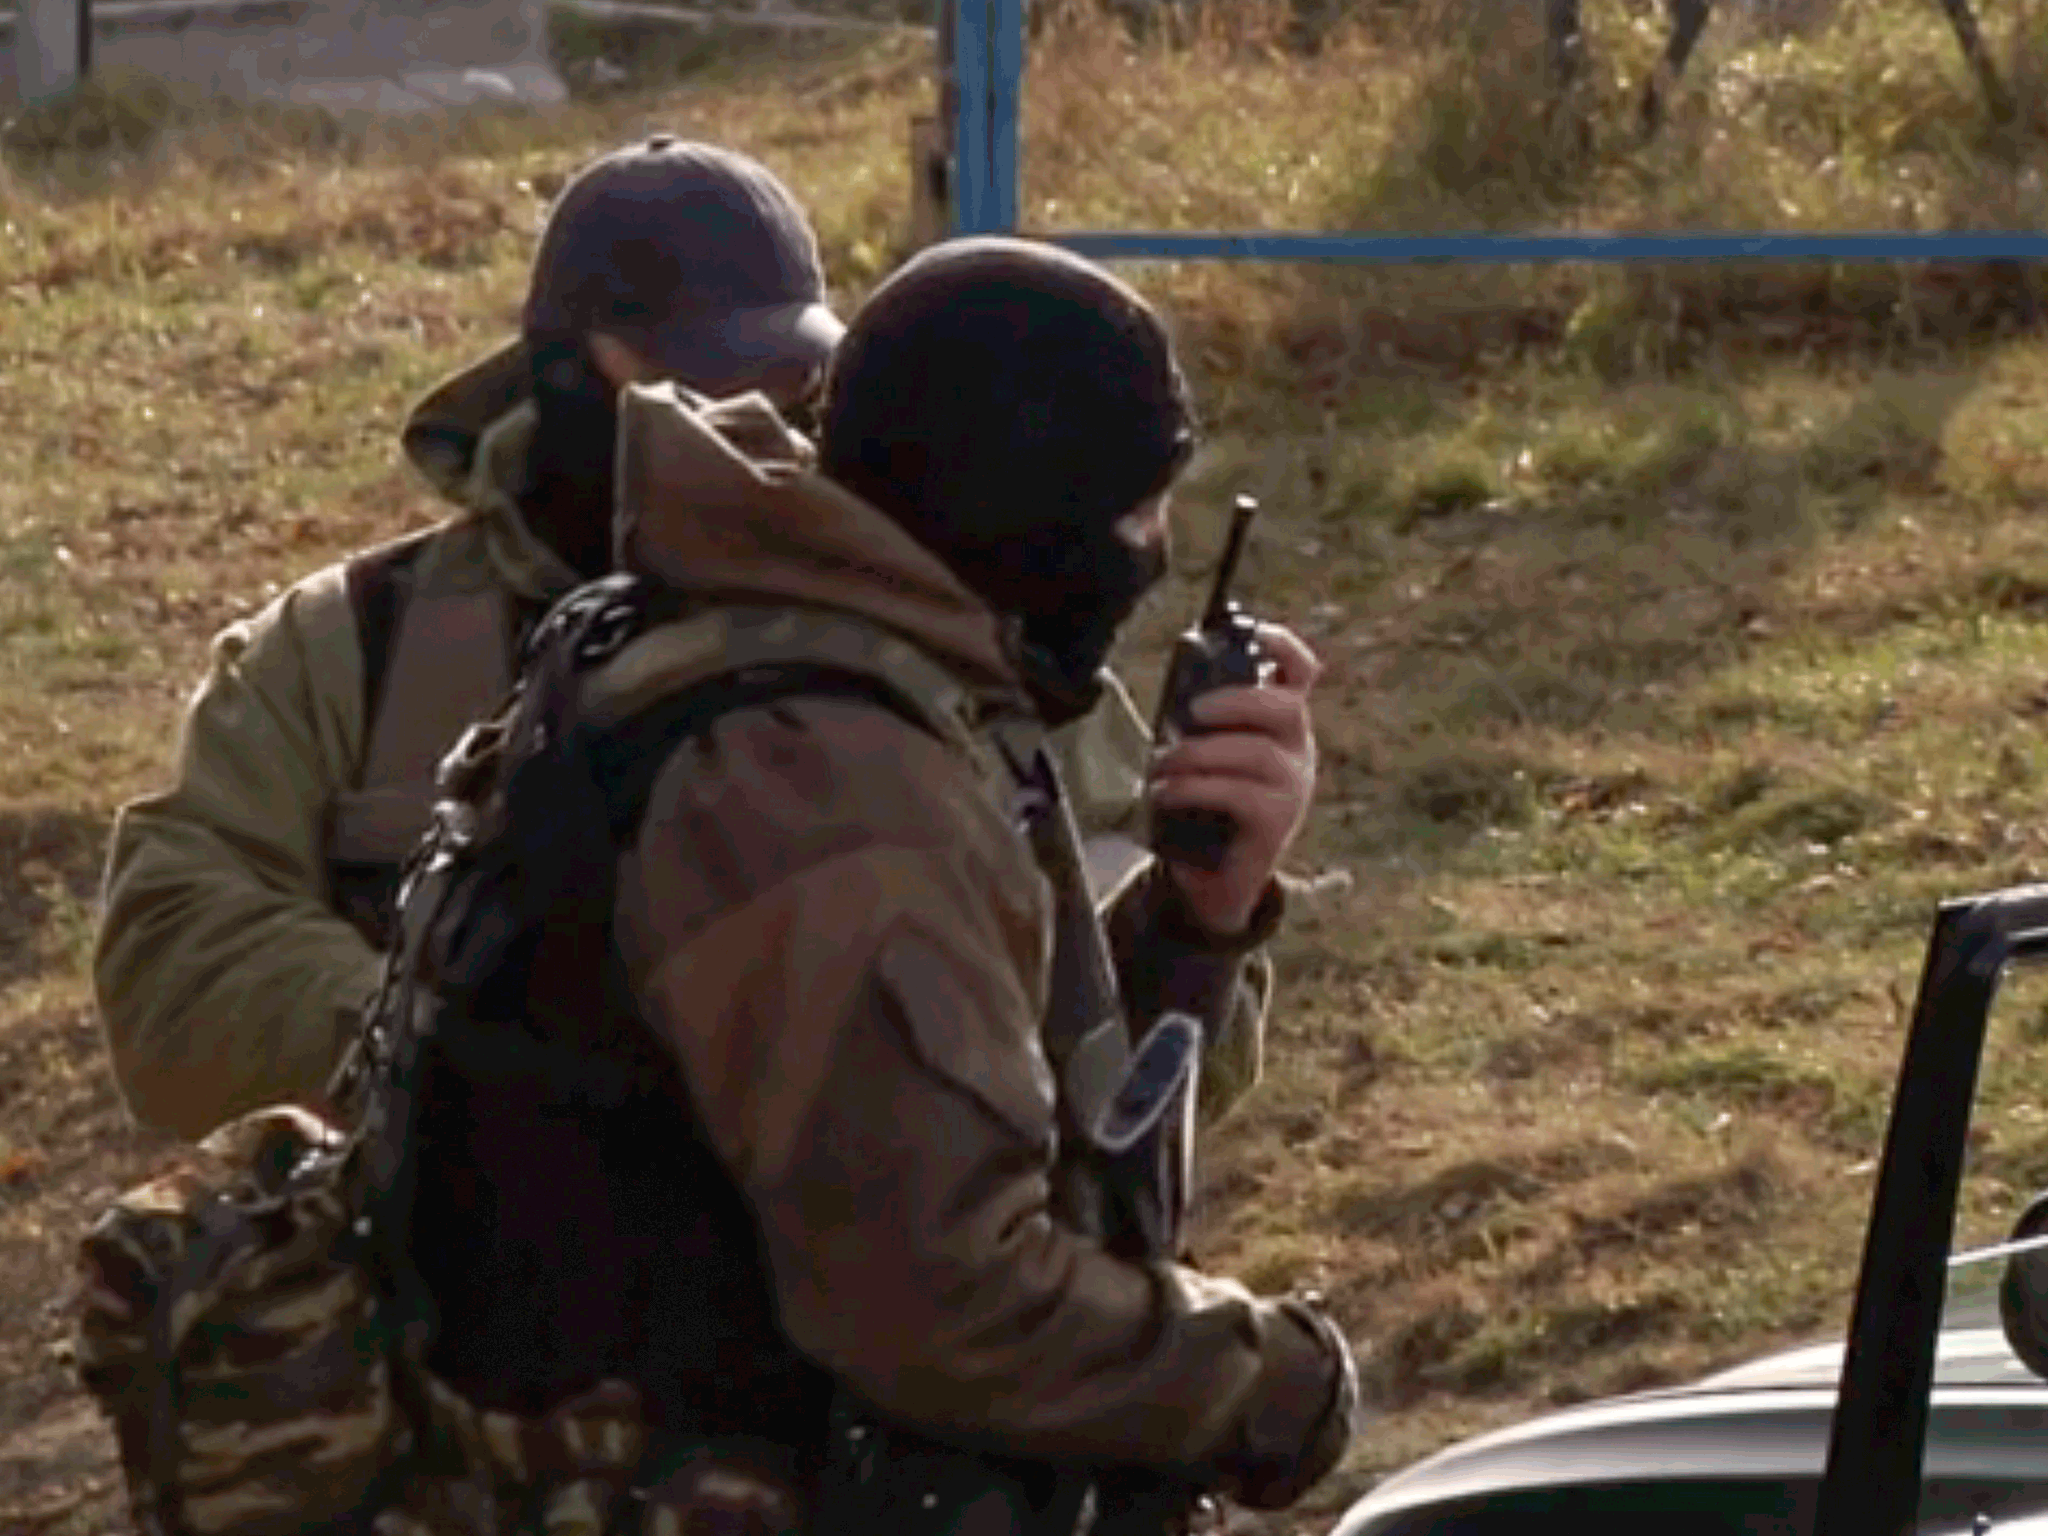 Russian special forces officers killed the militants in the volatile North Caucuses region